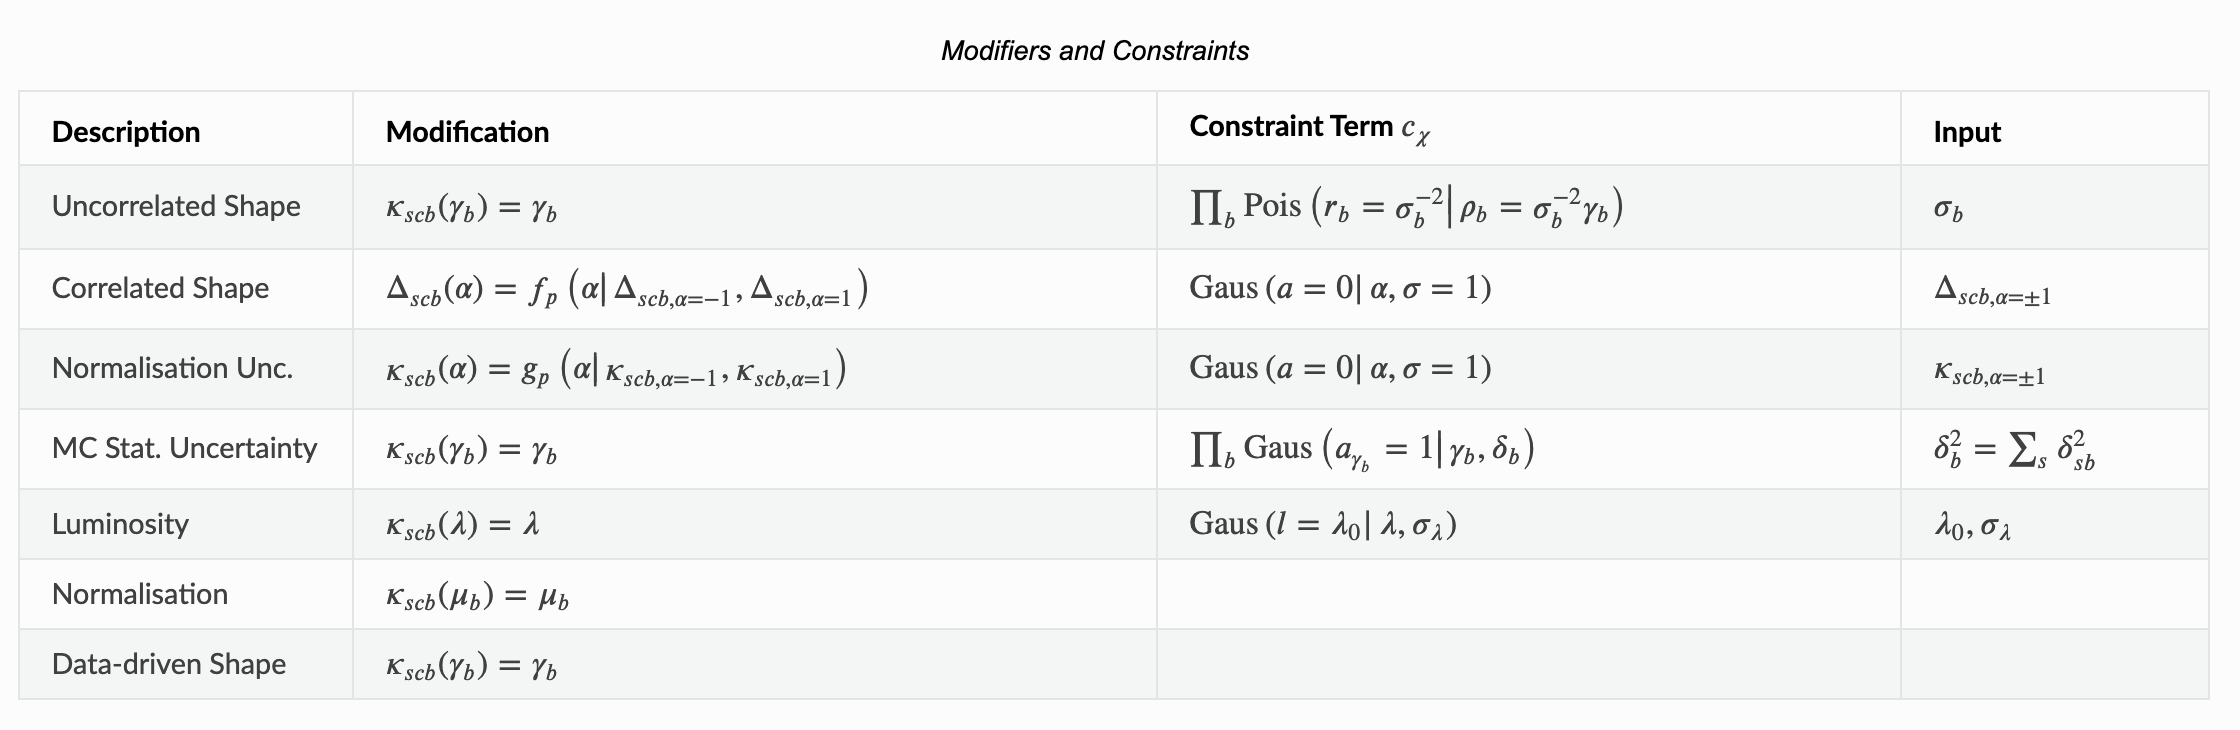 modifiers and constraints